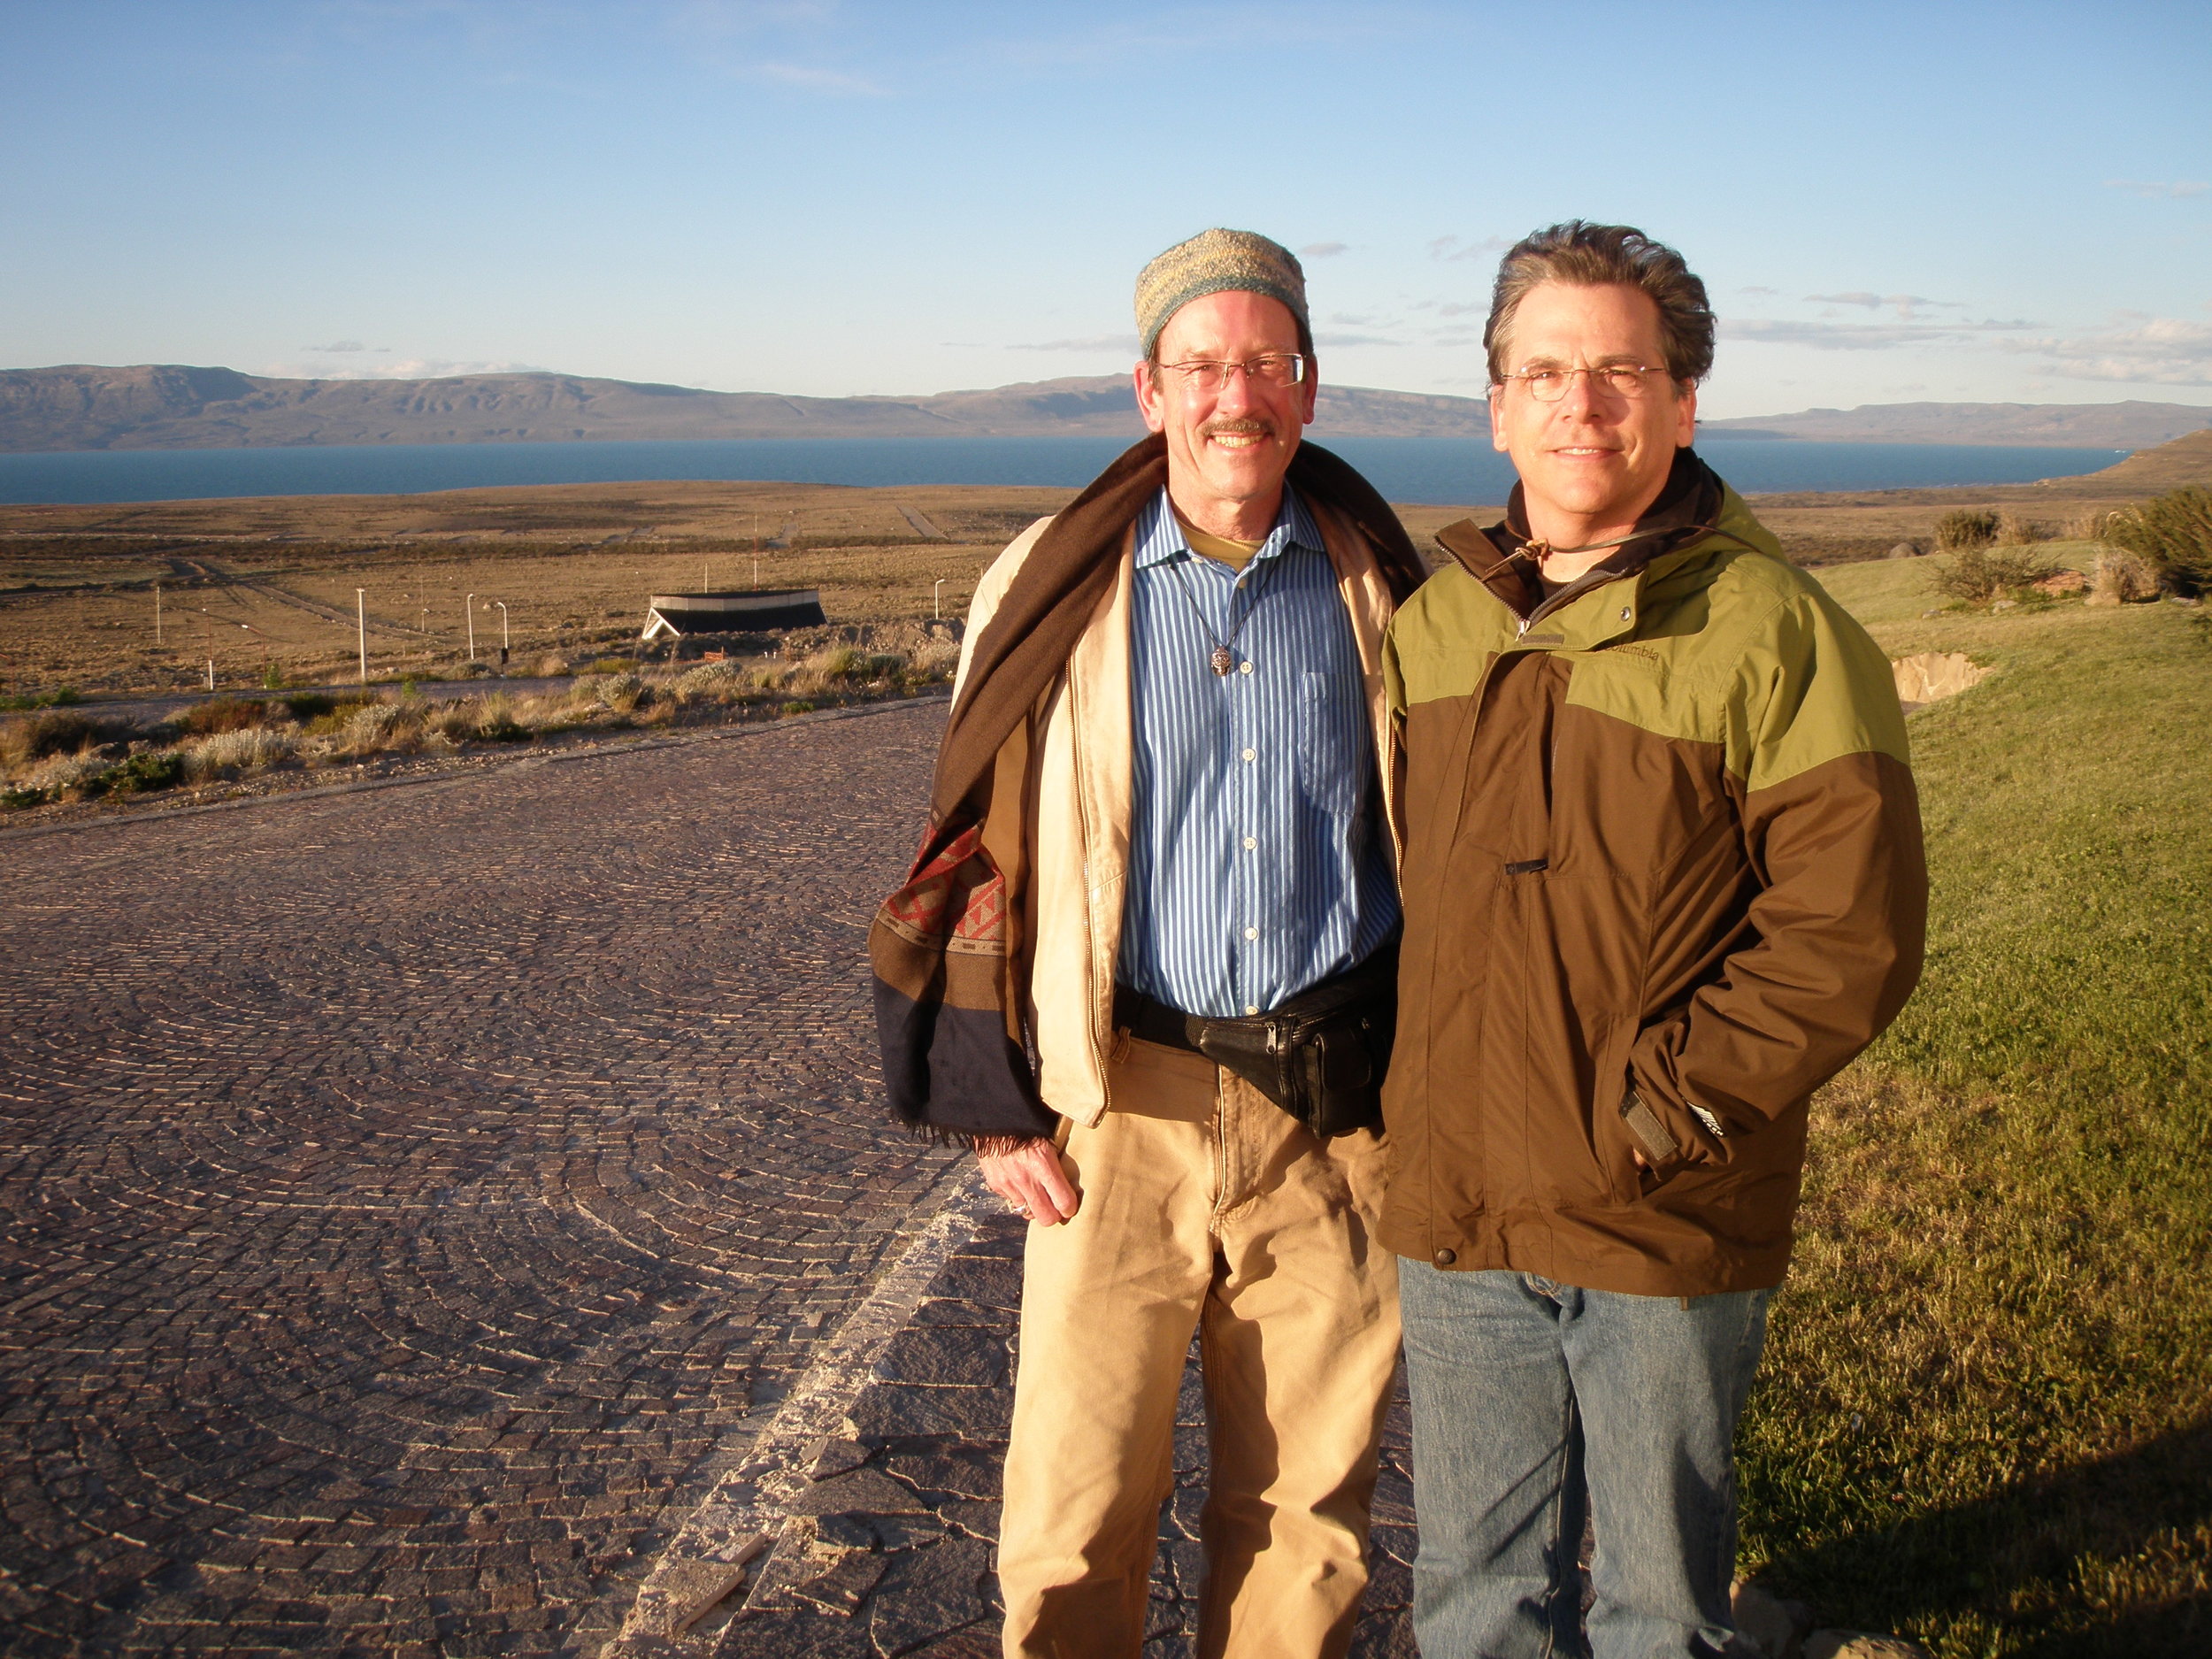 El Calafate, in Patagonia, Argentina. With my excellent travel buddy Stephen Silha.